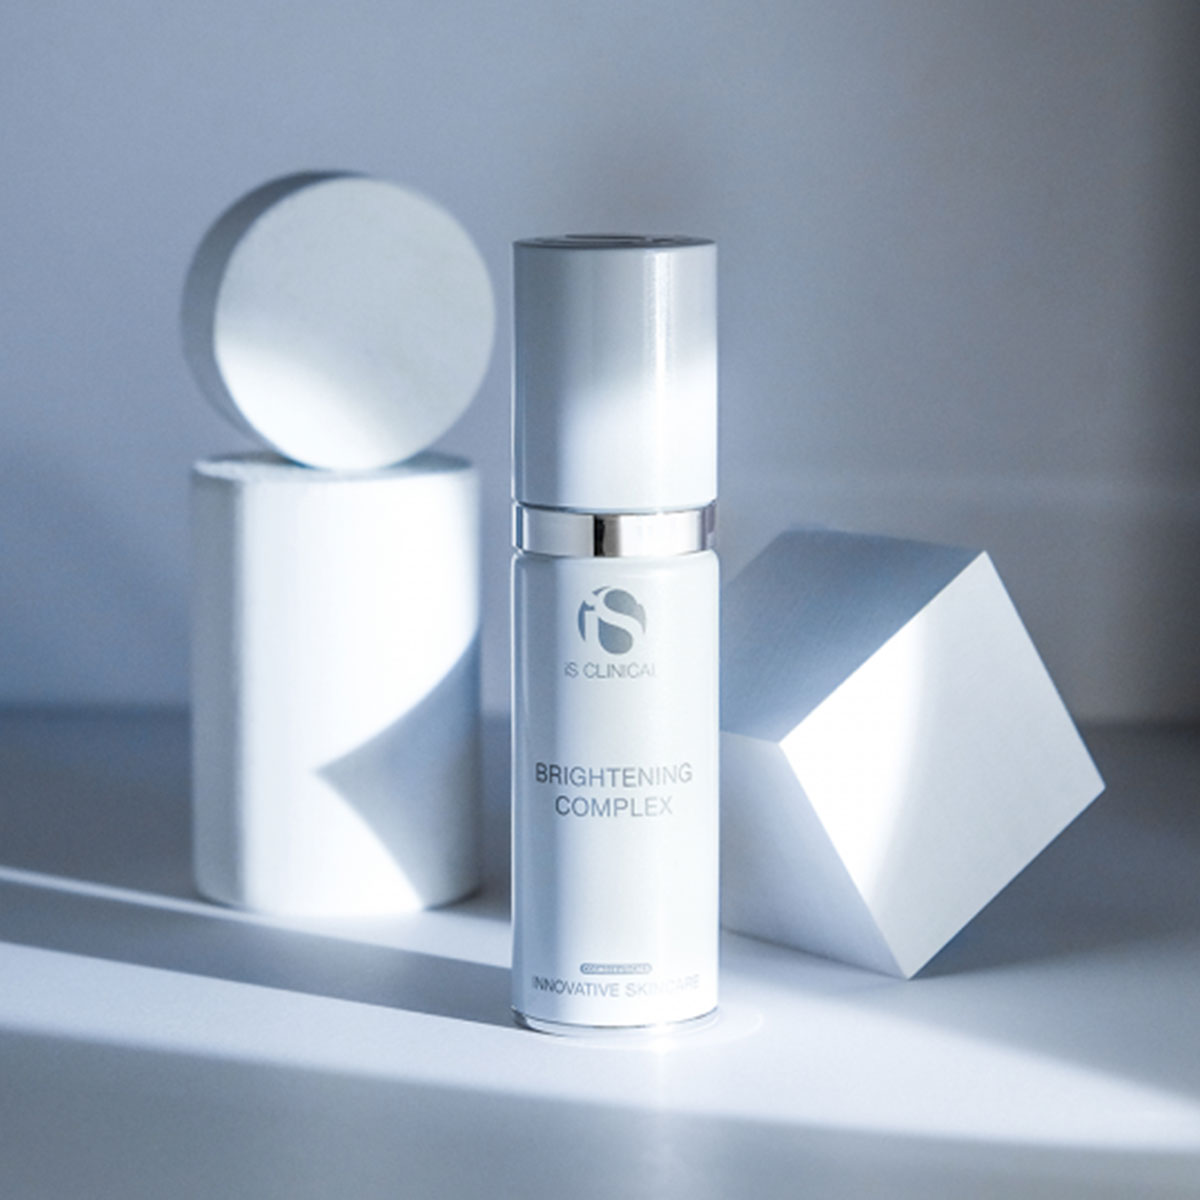 bottle of brightening complex by is clinical skincare botanicals